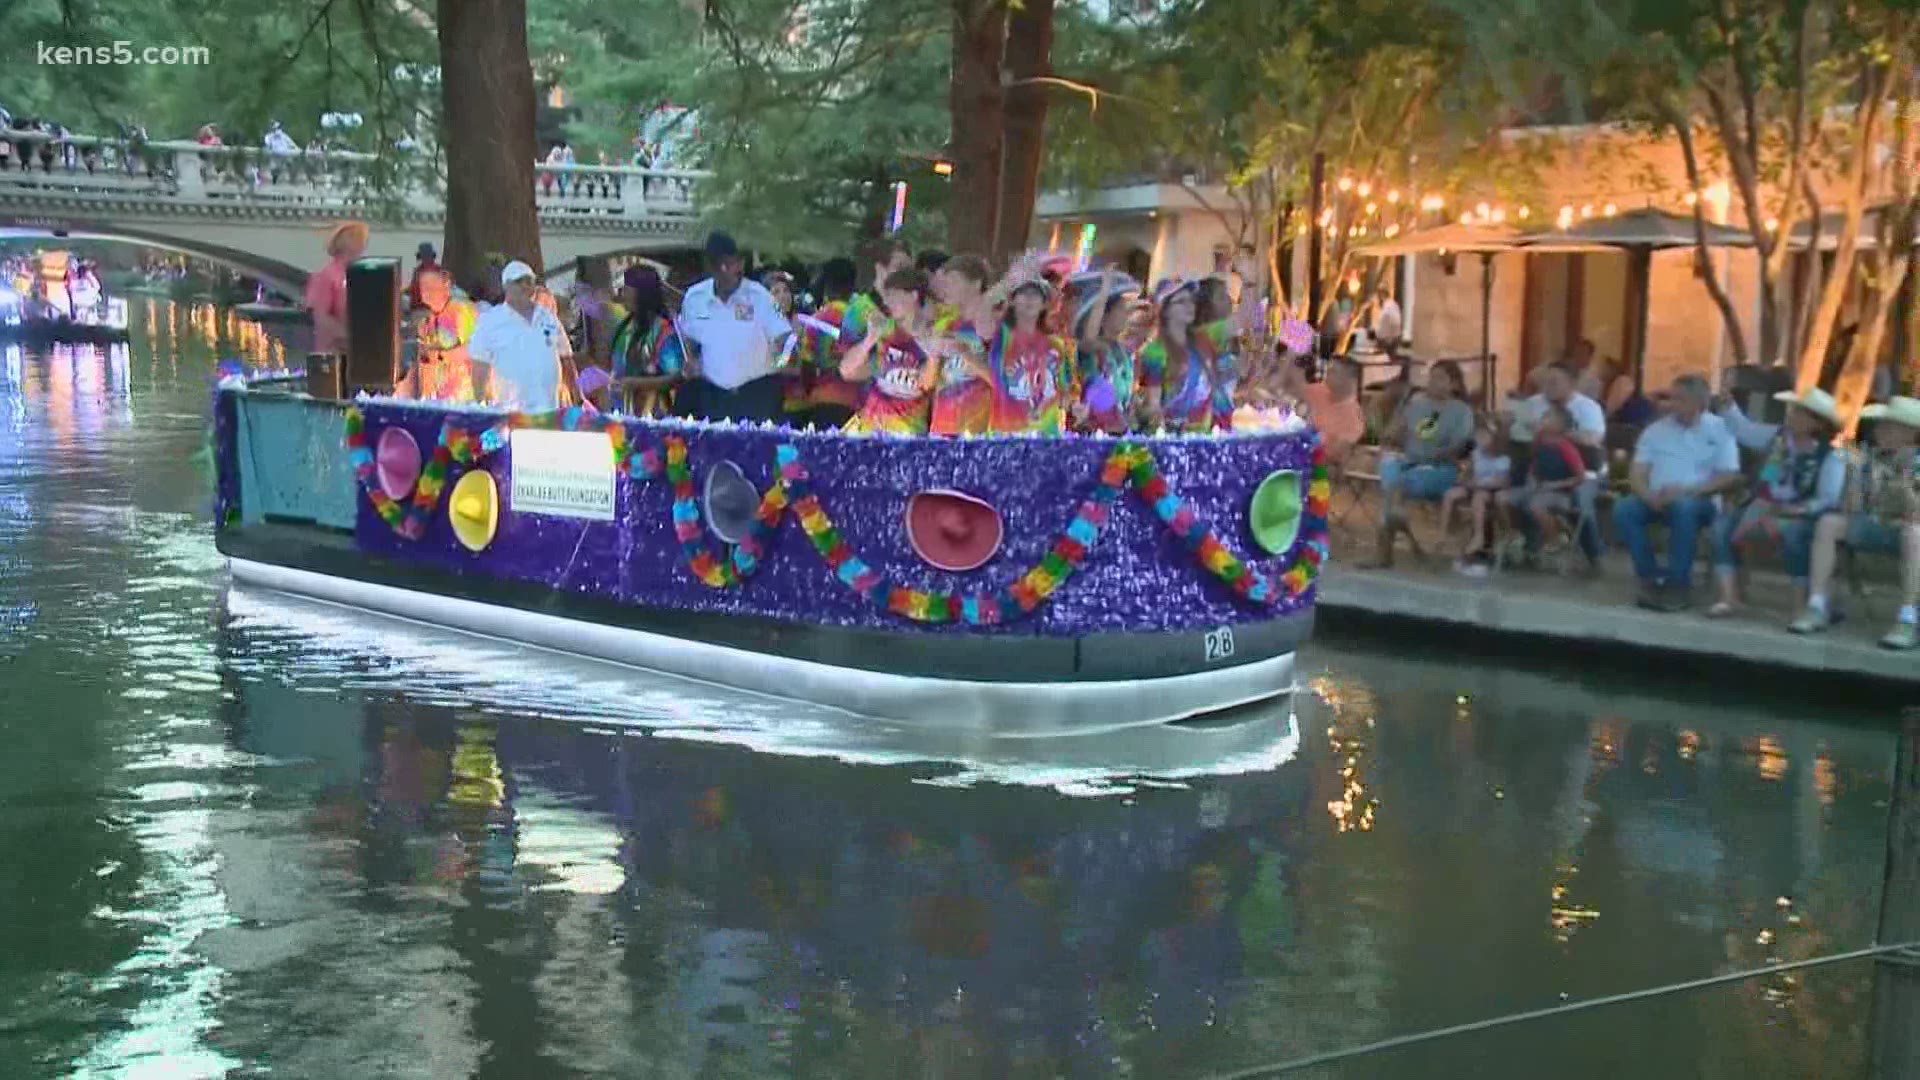 Thousands brave the heat at Texas Cavaliers River Parade